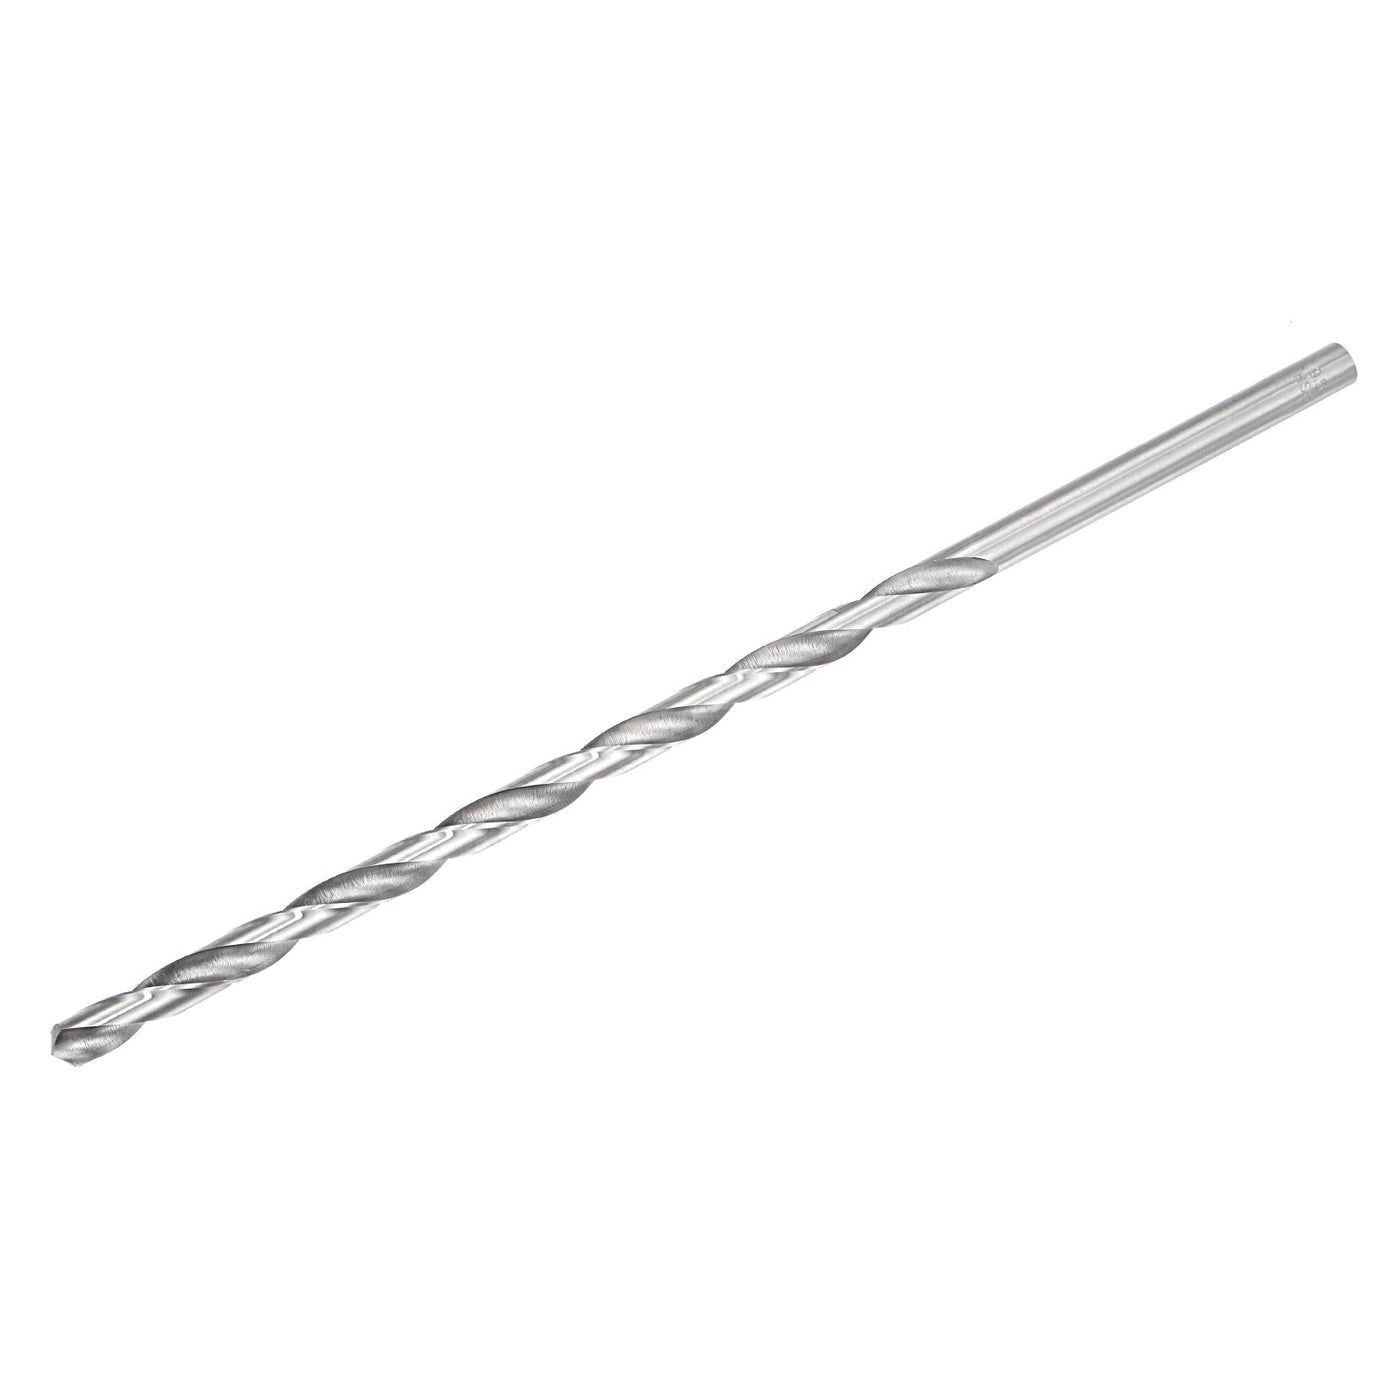 uxcell Uxcell 9.5mm Twist Drill Bits, High-Speed Steel Extra Long Drill Bit 300mm Length